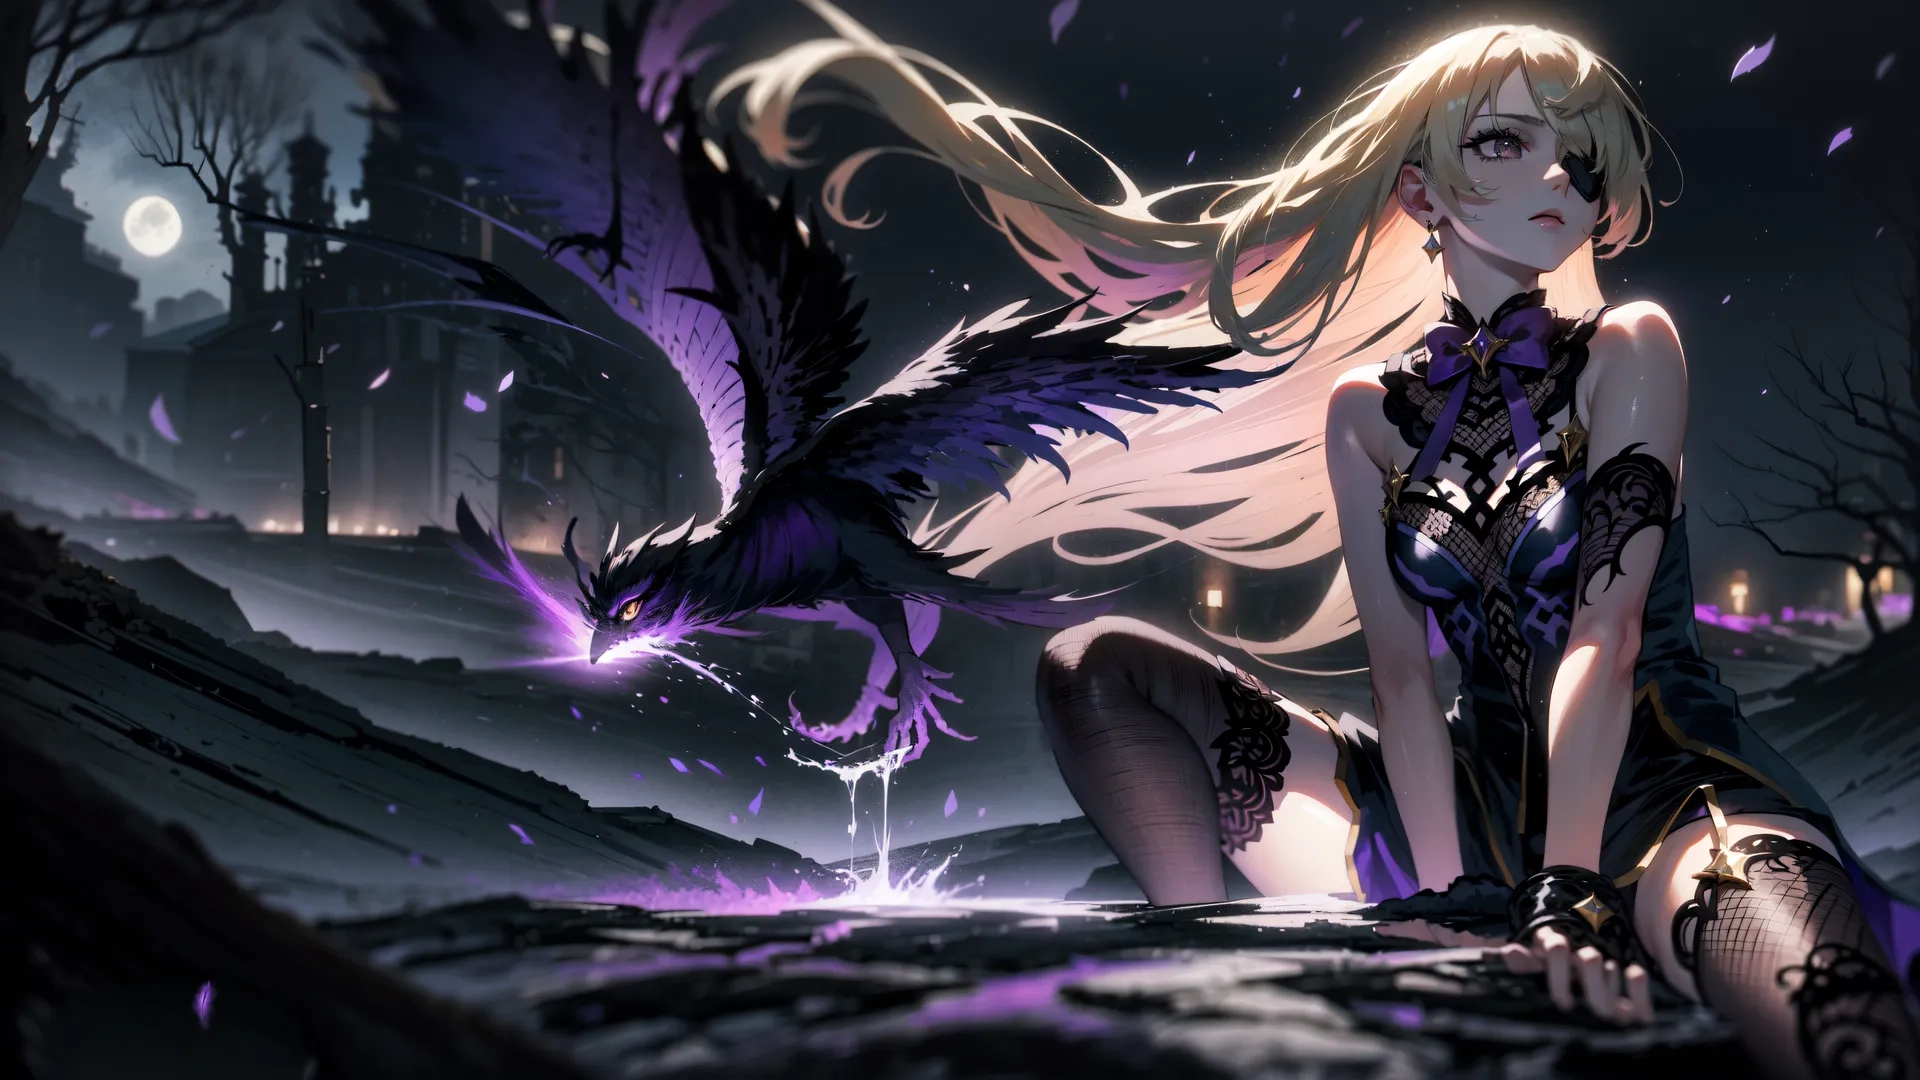 an image of a girl in a witch costume and her hands together, with a raven on the ground behind her flying bird across the scene at night
